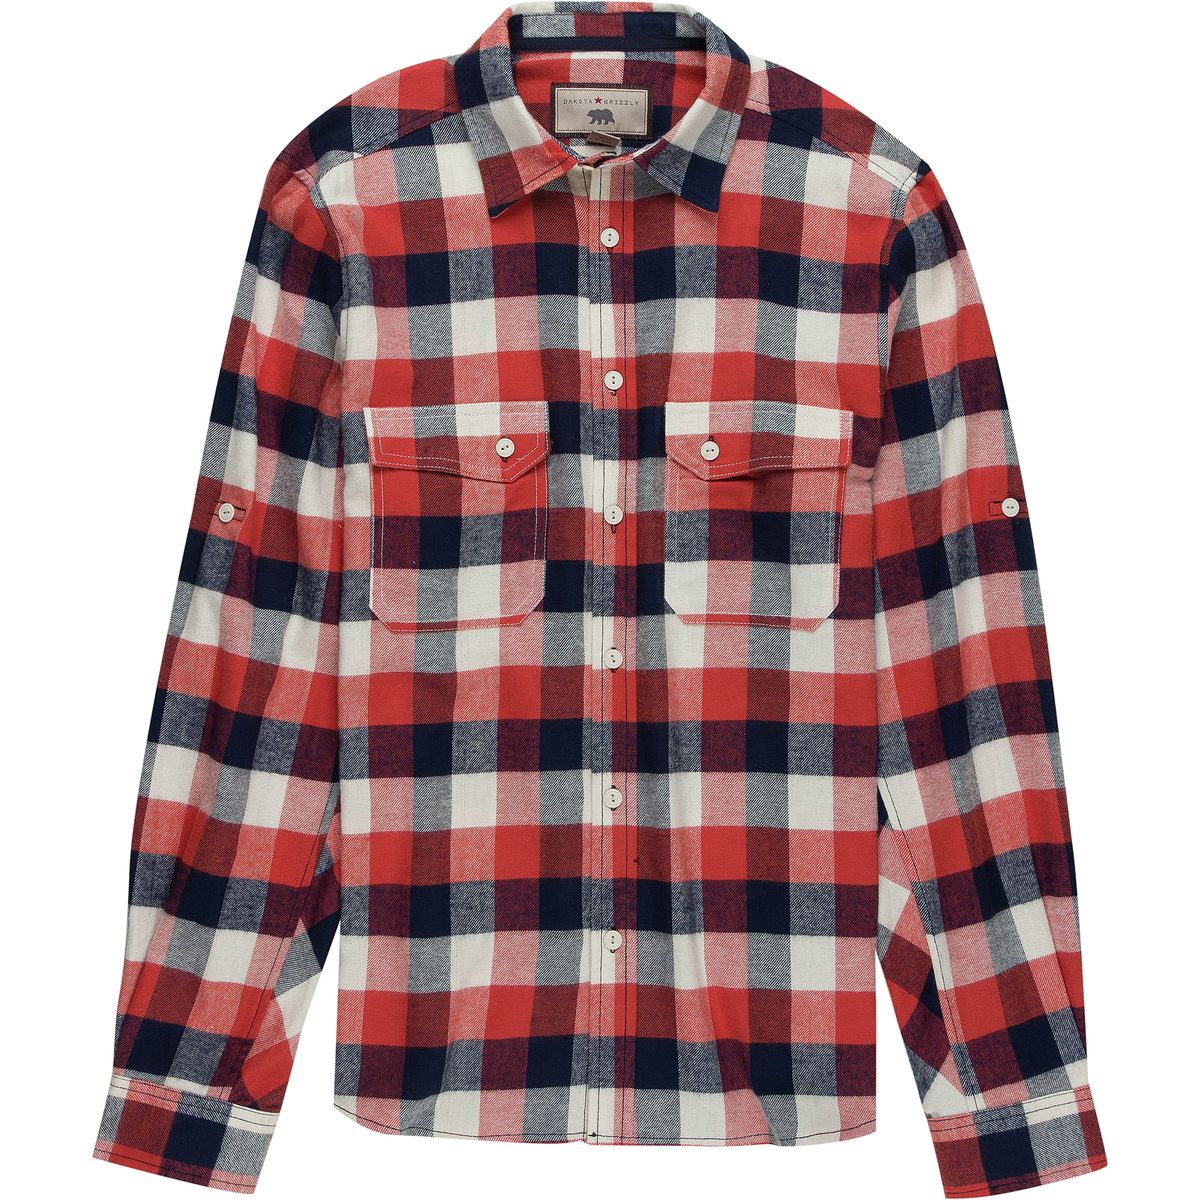 Men's Flannel Shirts - Long Sleeve - Country / Outdoors Clothing